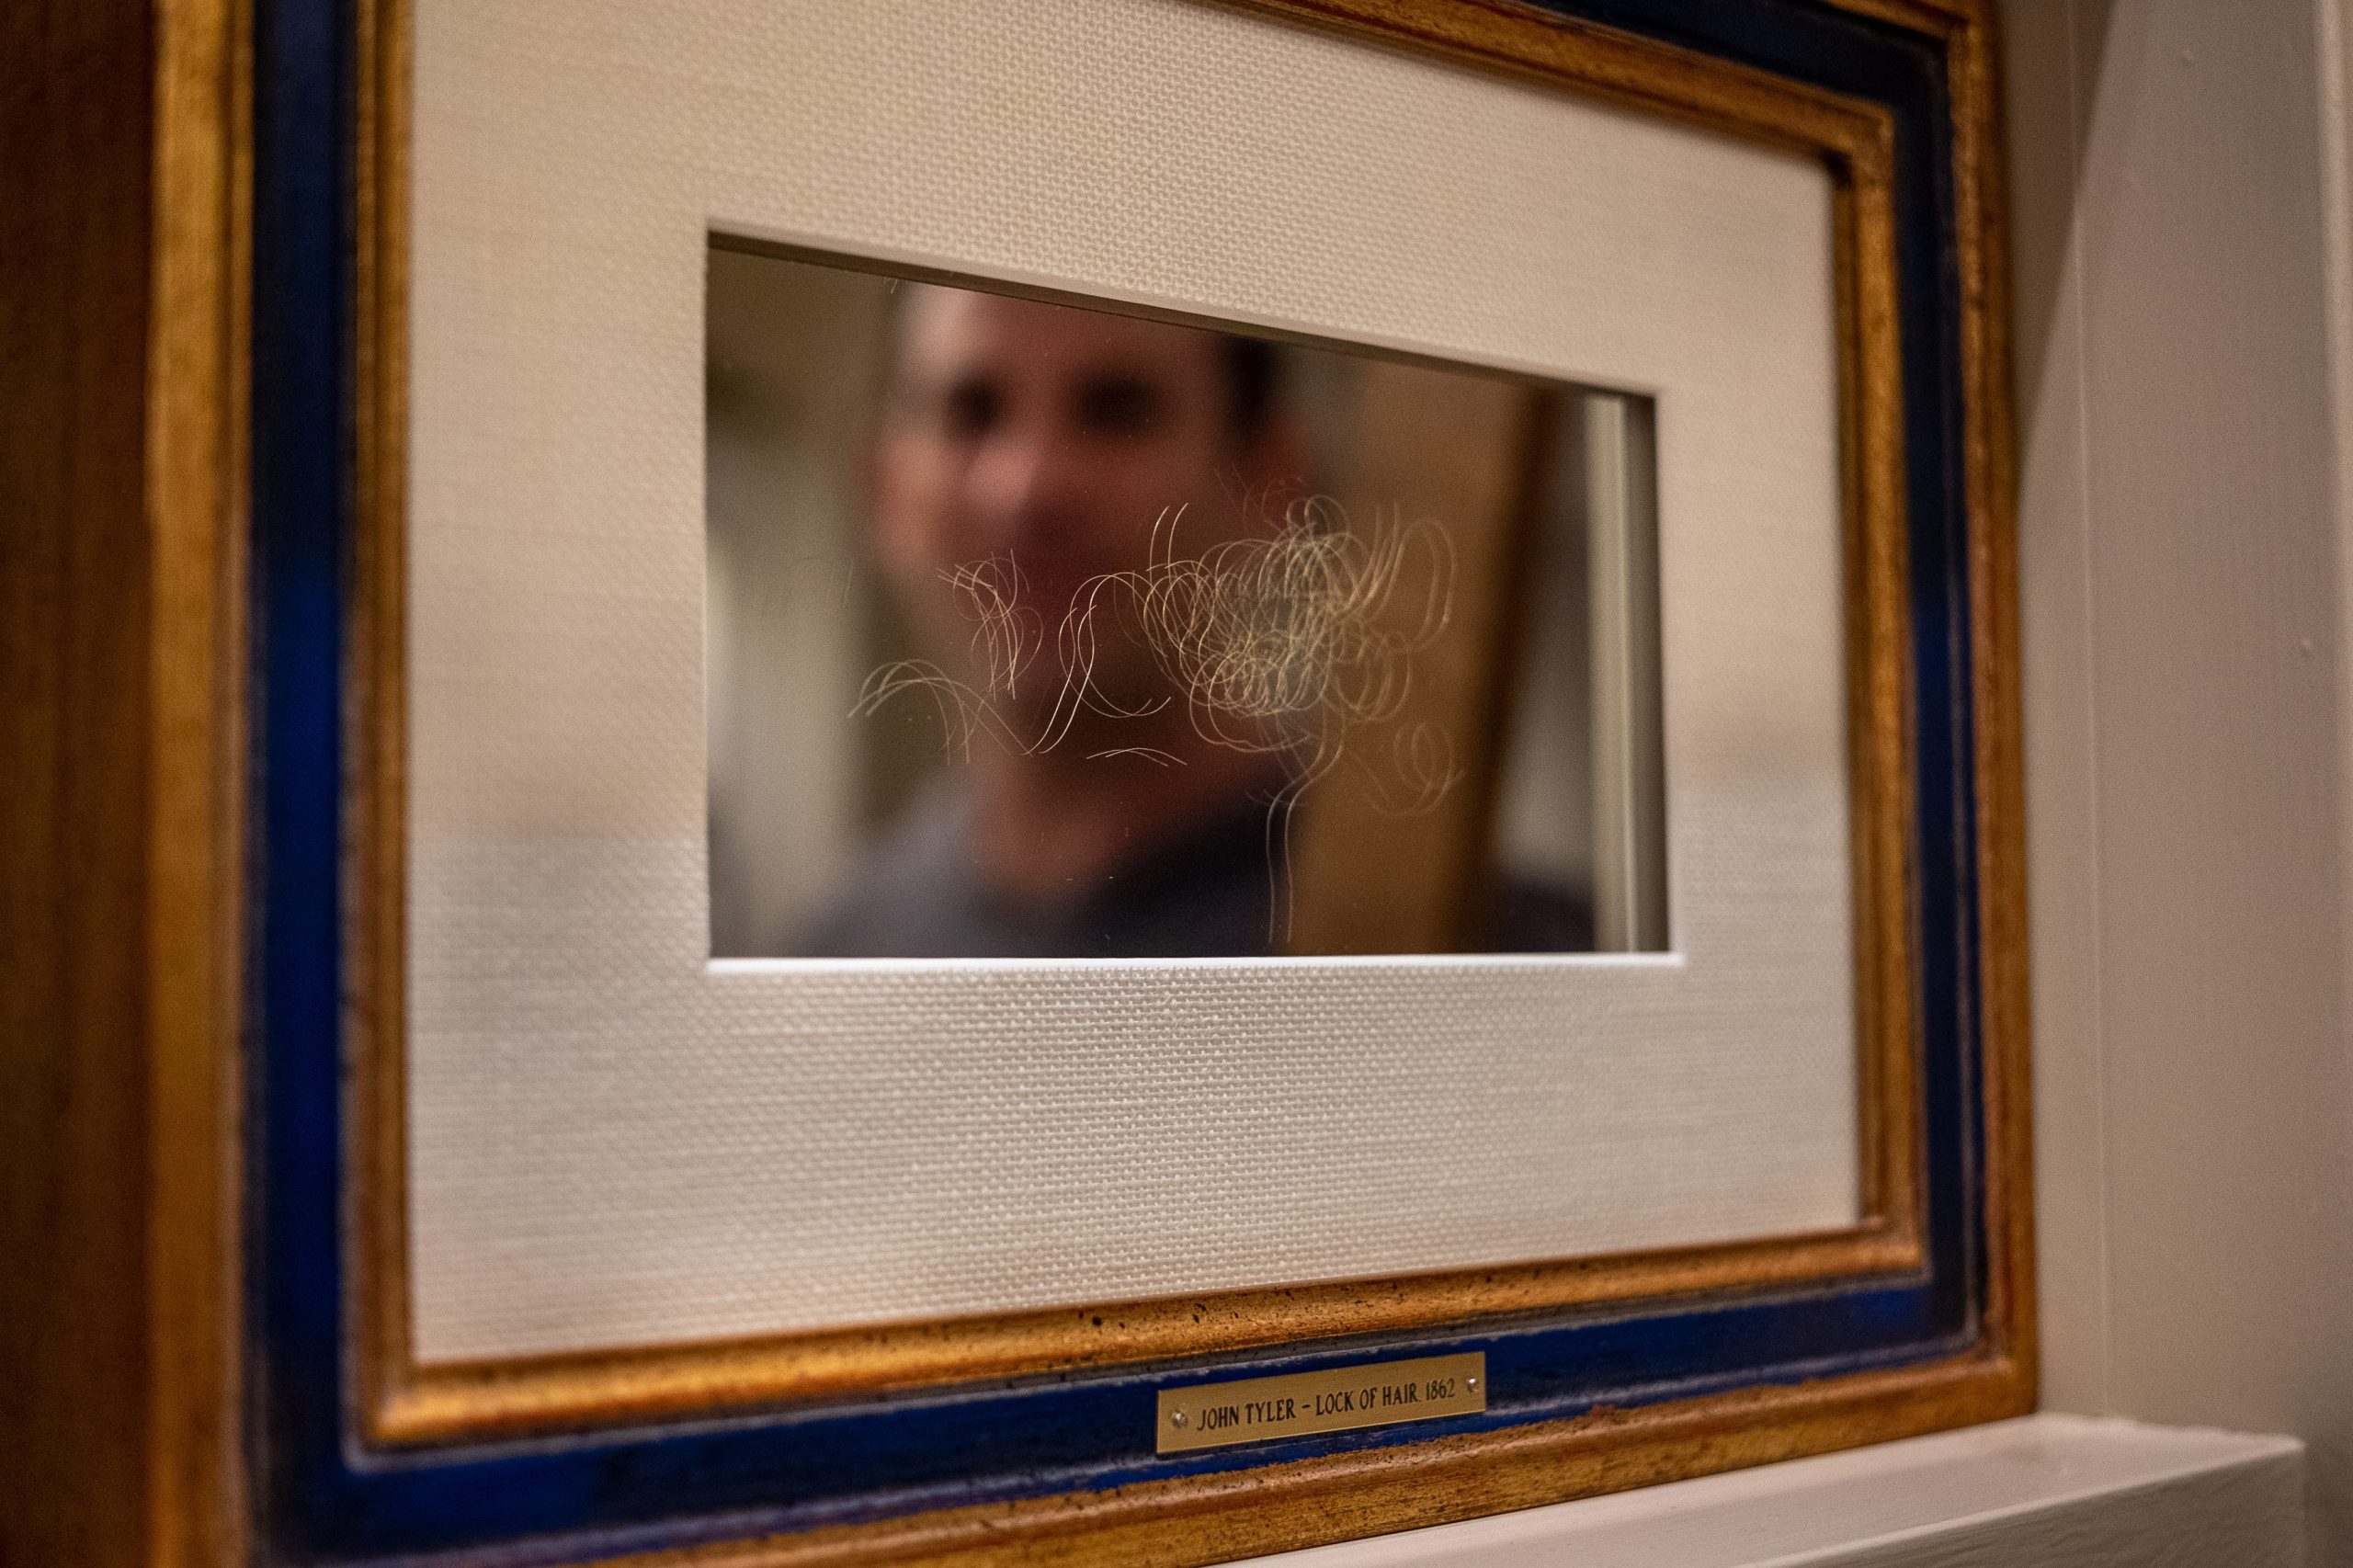 Hair is seen in a frame, under the reflection of a man's face.